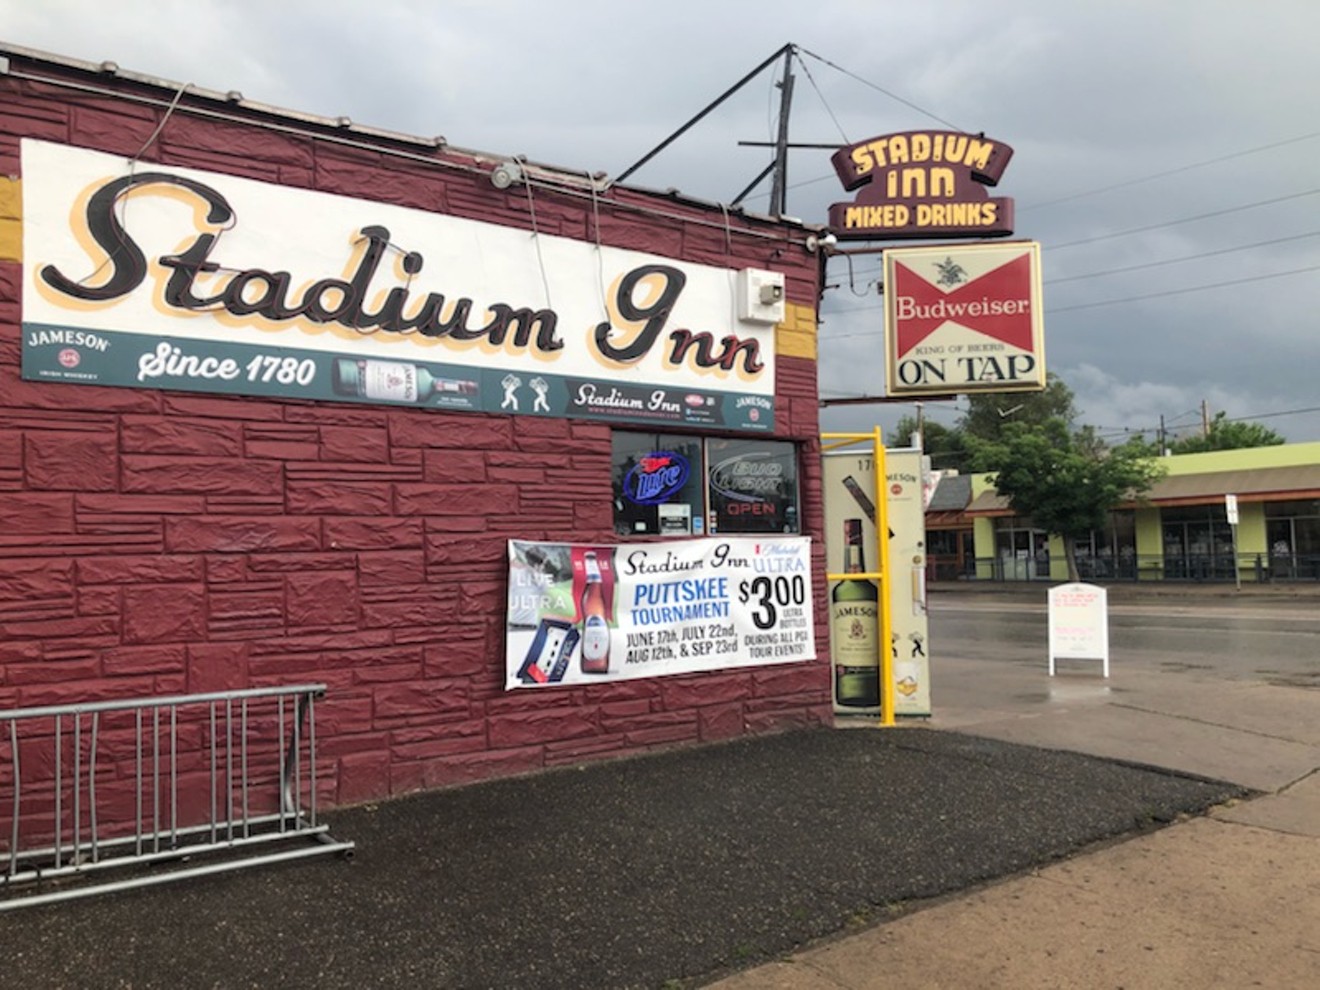 The Stadium Inn is one of the longest-standing business in the University neighborhood, operating as a bar at 1701 East Evans Avenue since the 1940s.